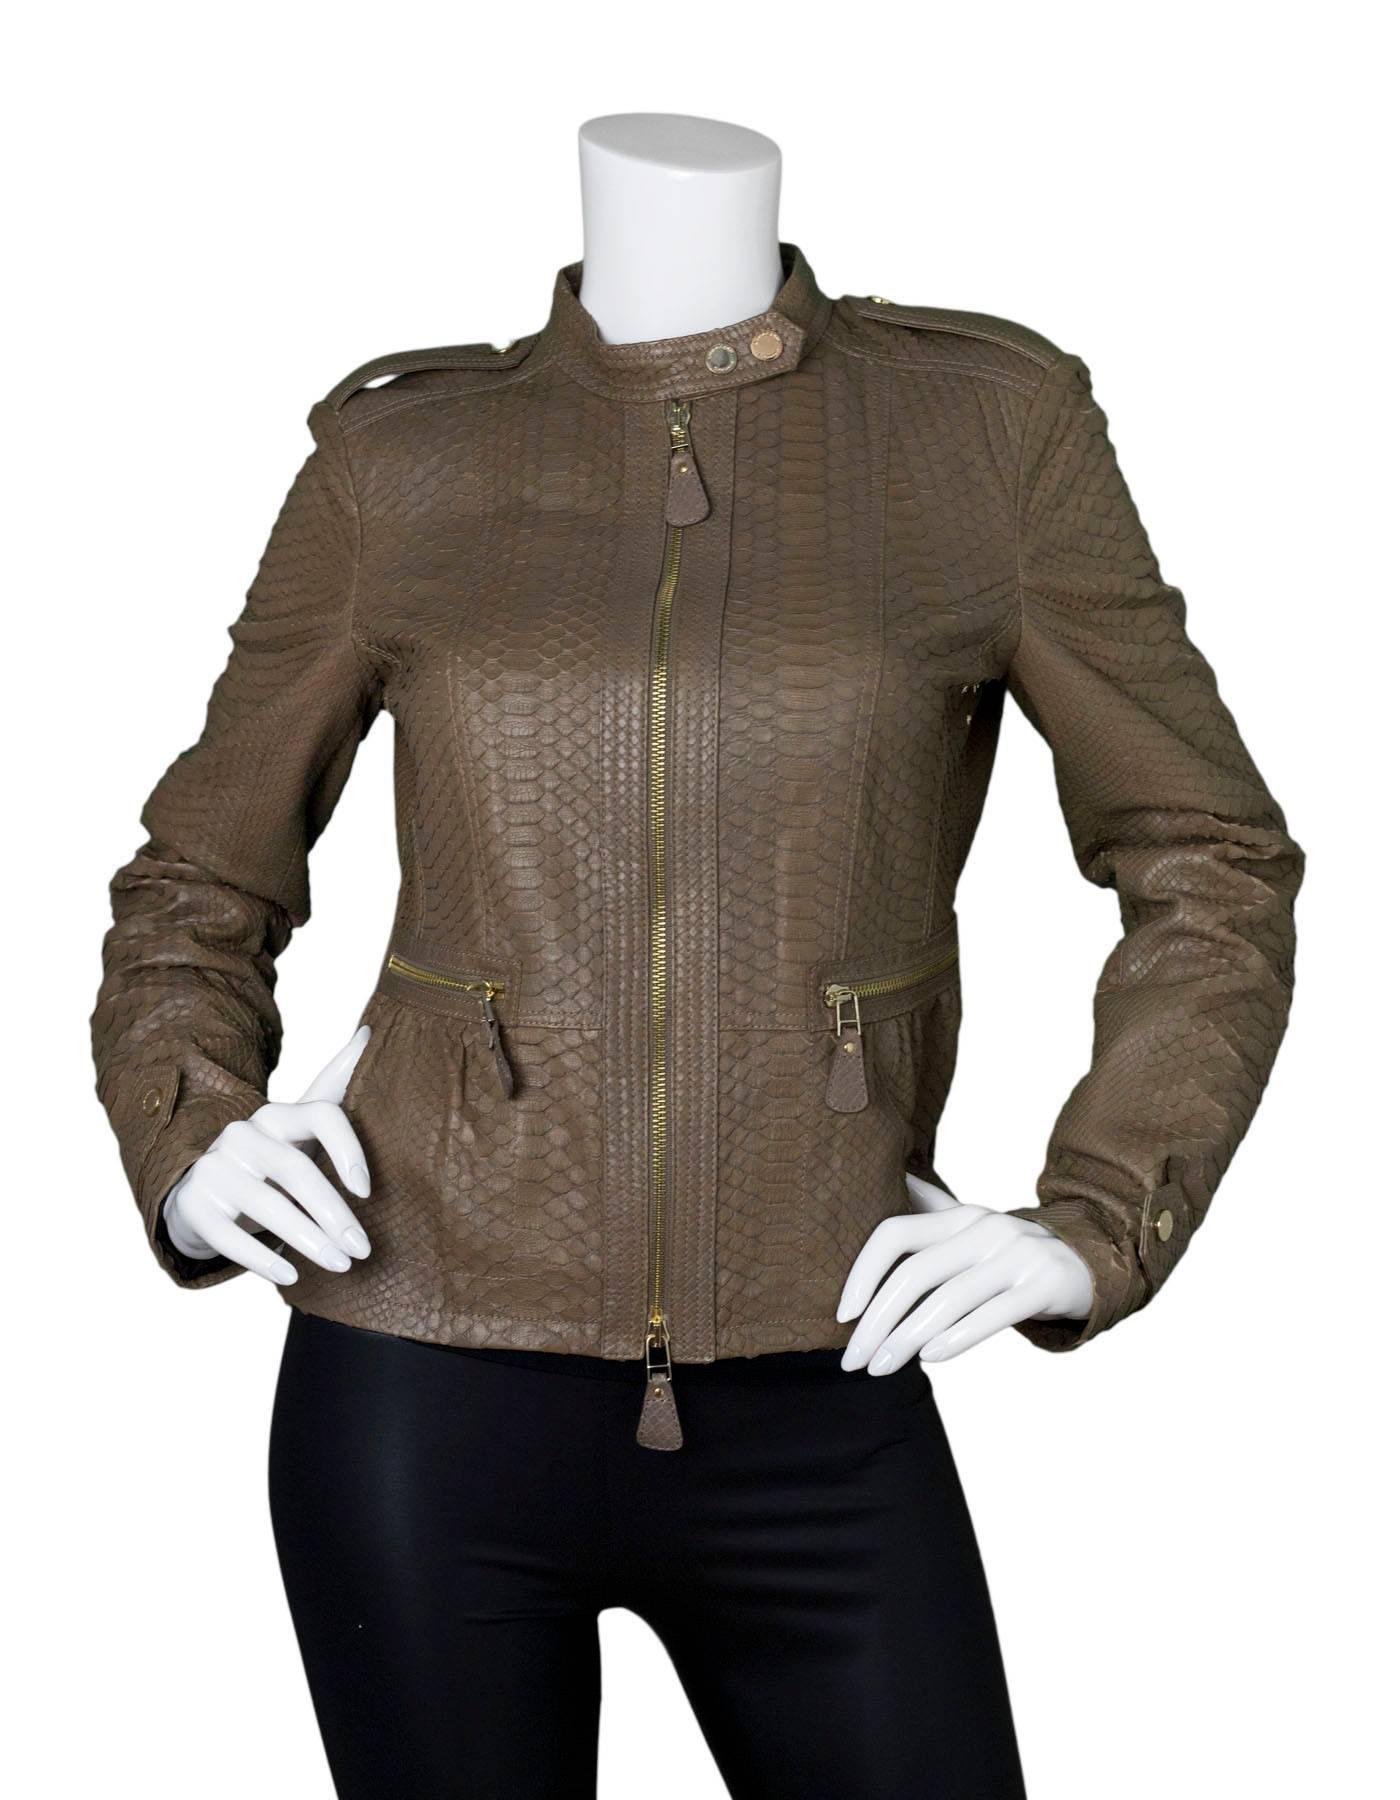 Burberry London Fawn Python Peplum Jacket 

Made In: Italy
Color: Fawn
Composition: 100% python skin
Closure/Opening: Front double zip closure
Exterior Pockets: Two hip zip pockets
Interior Pockets: None
Retail Price: $5,750 + tax
Overall Condition: